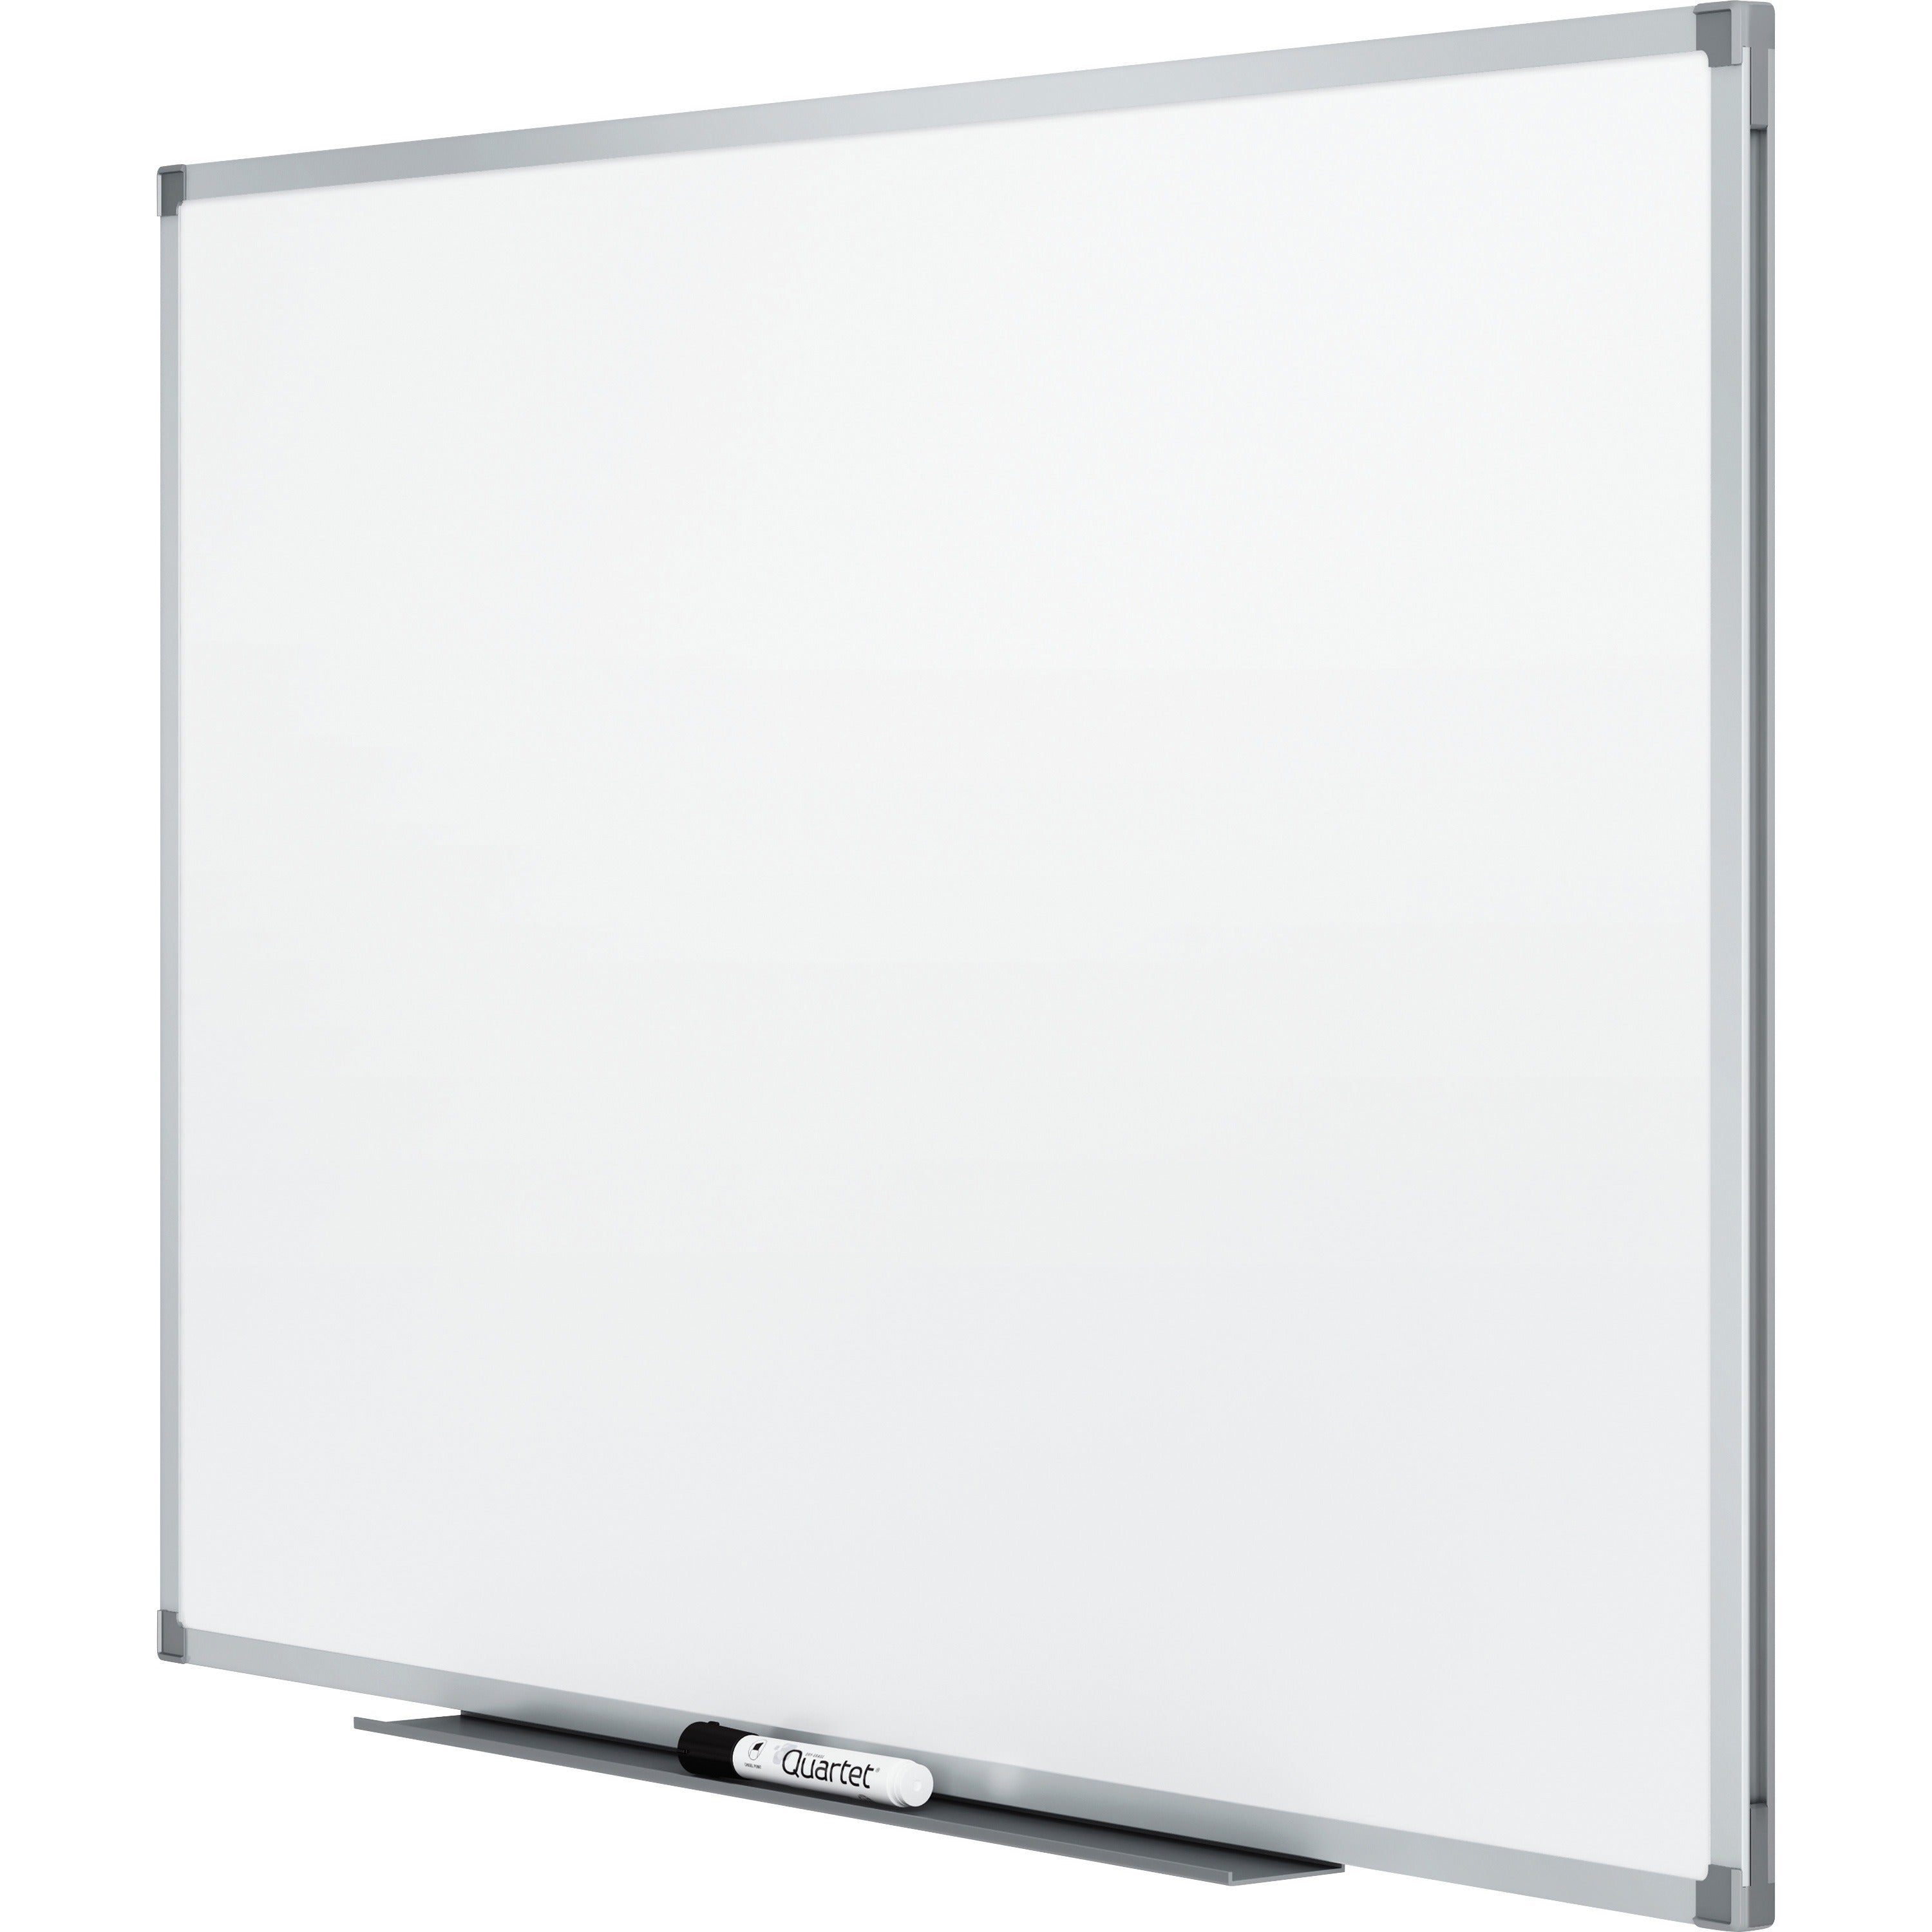 quartet-standard-duramax-magnetic-whiteboard-96-8-ft-width-x-48-4-ft-height-white-porcelain-surface-silver-aluminum-frame-rectangle-horizontal-vertical-magnetic-assembly-required-1-each-taa-compliant_qrt85518 - 2